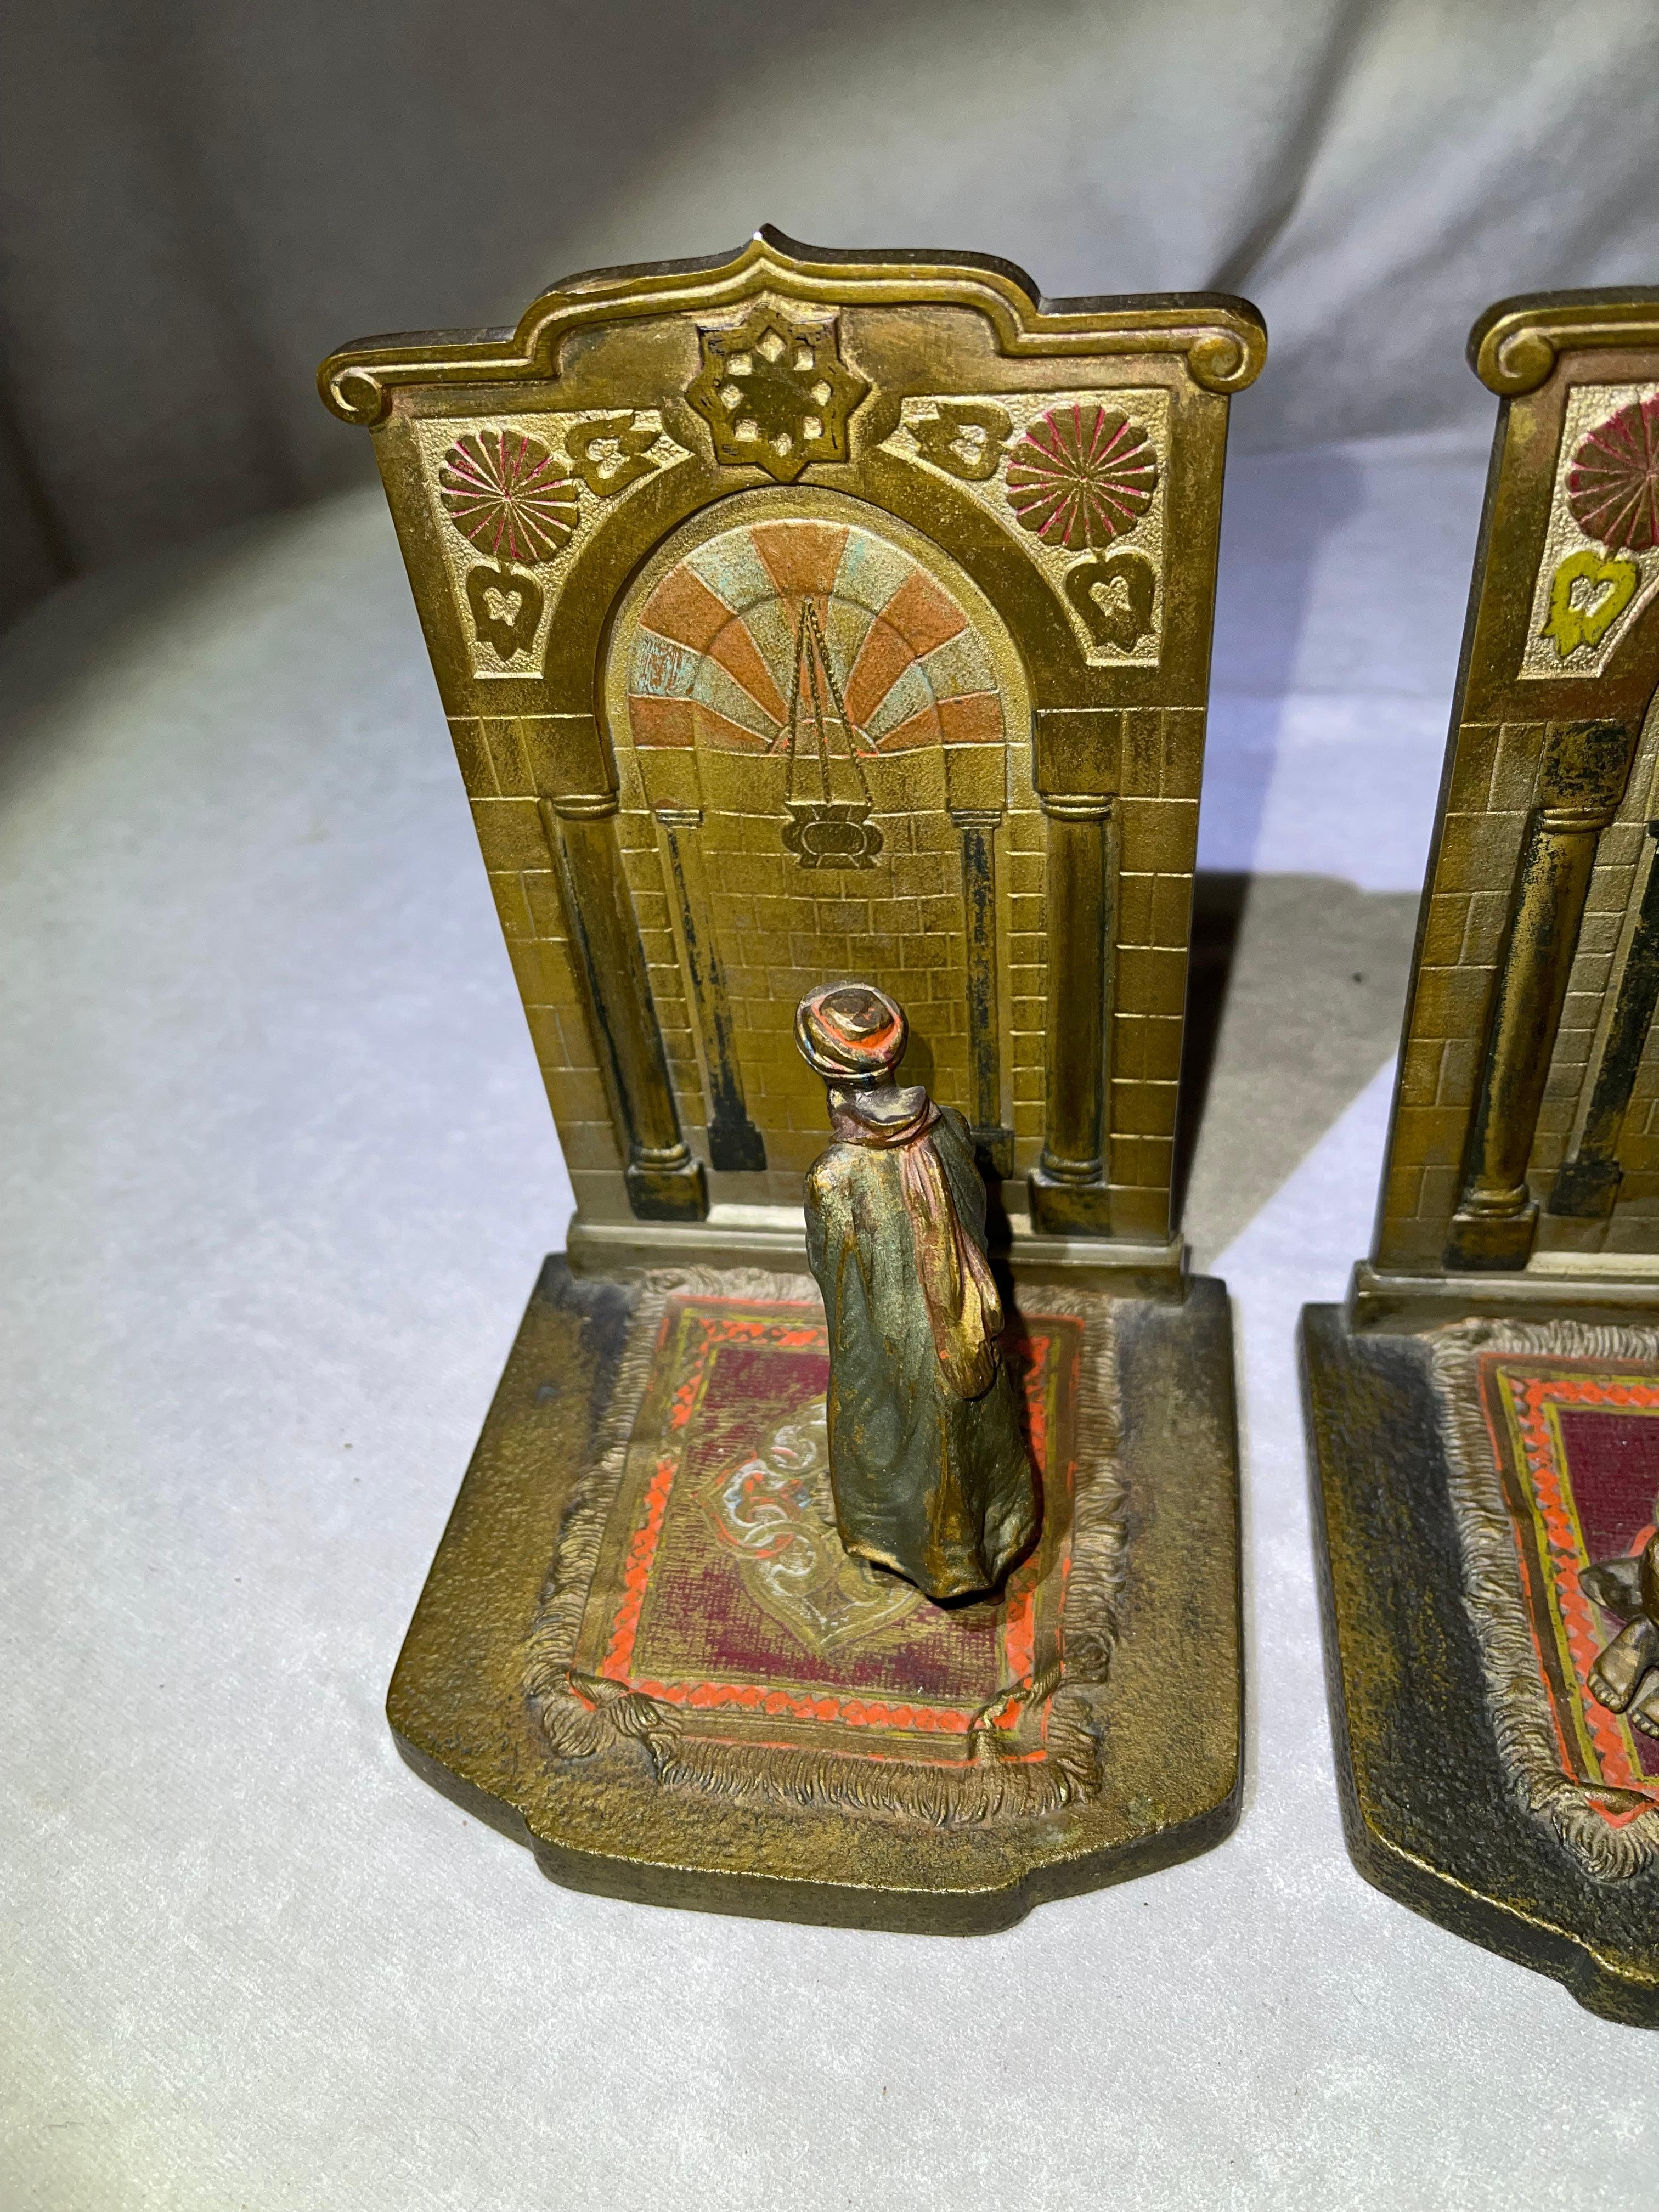 These highly detailed bronze bookends are a fine example of cold painted Vienna bronze workmanship. Brightly colored and crisp casting is often the work by the artist 